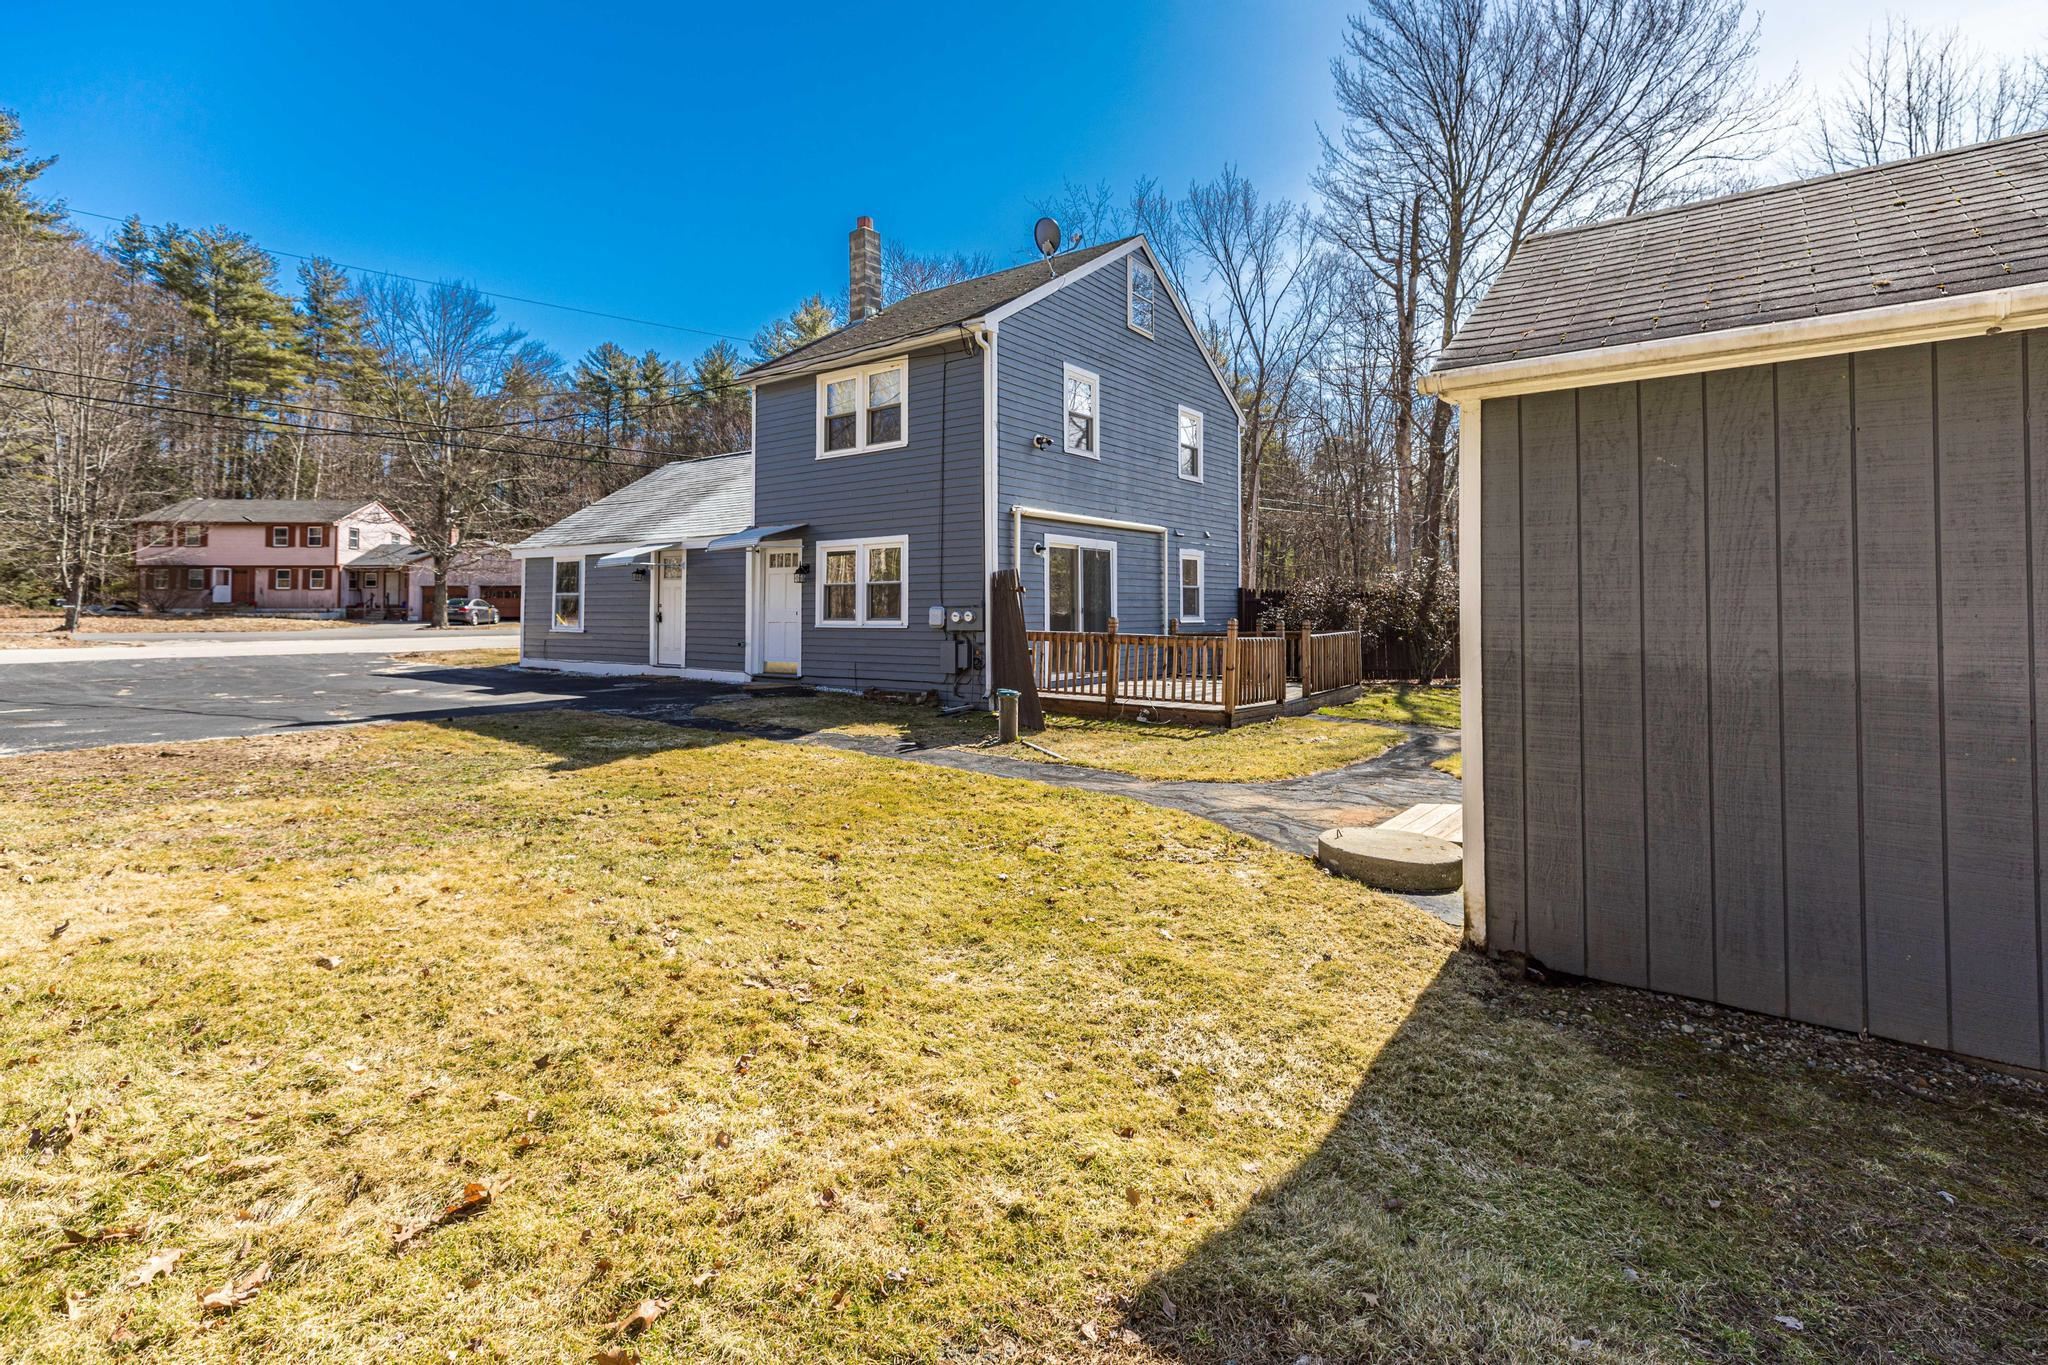 10 Beech Hill Road, Exeter, NH 03833